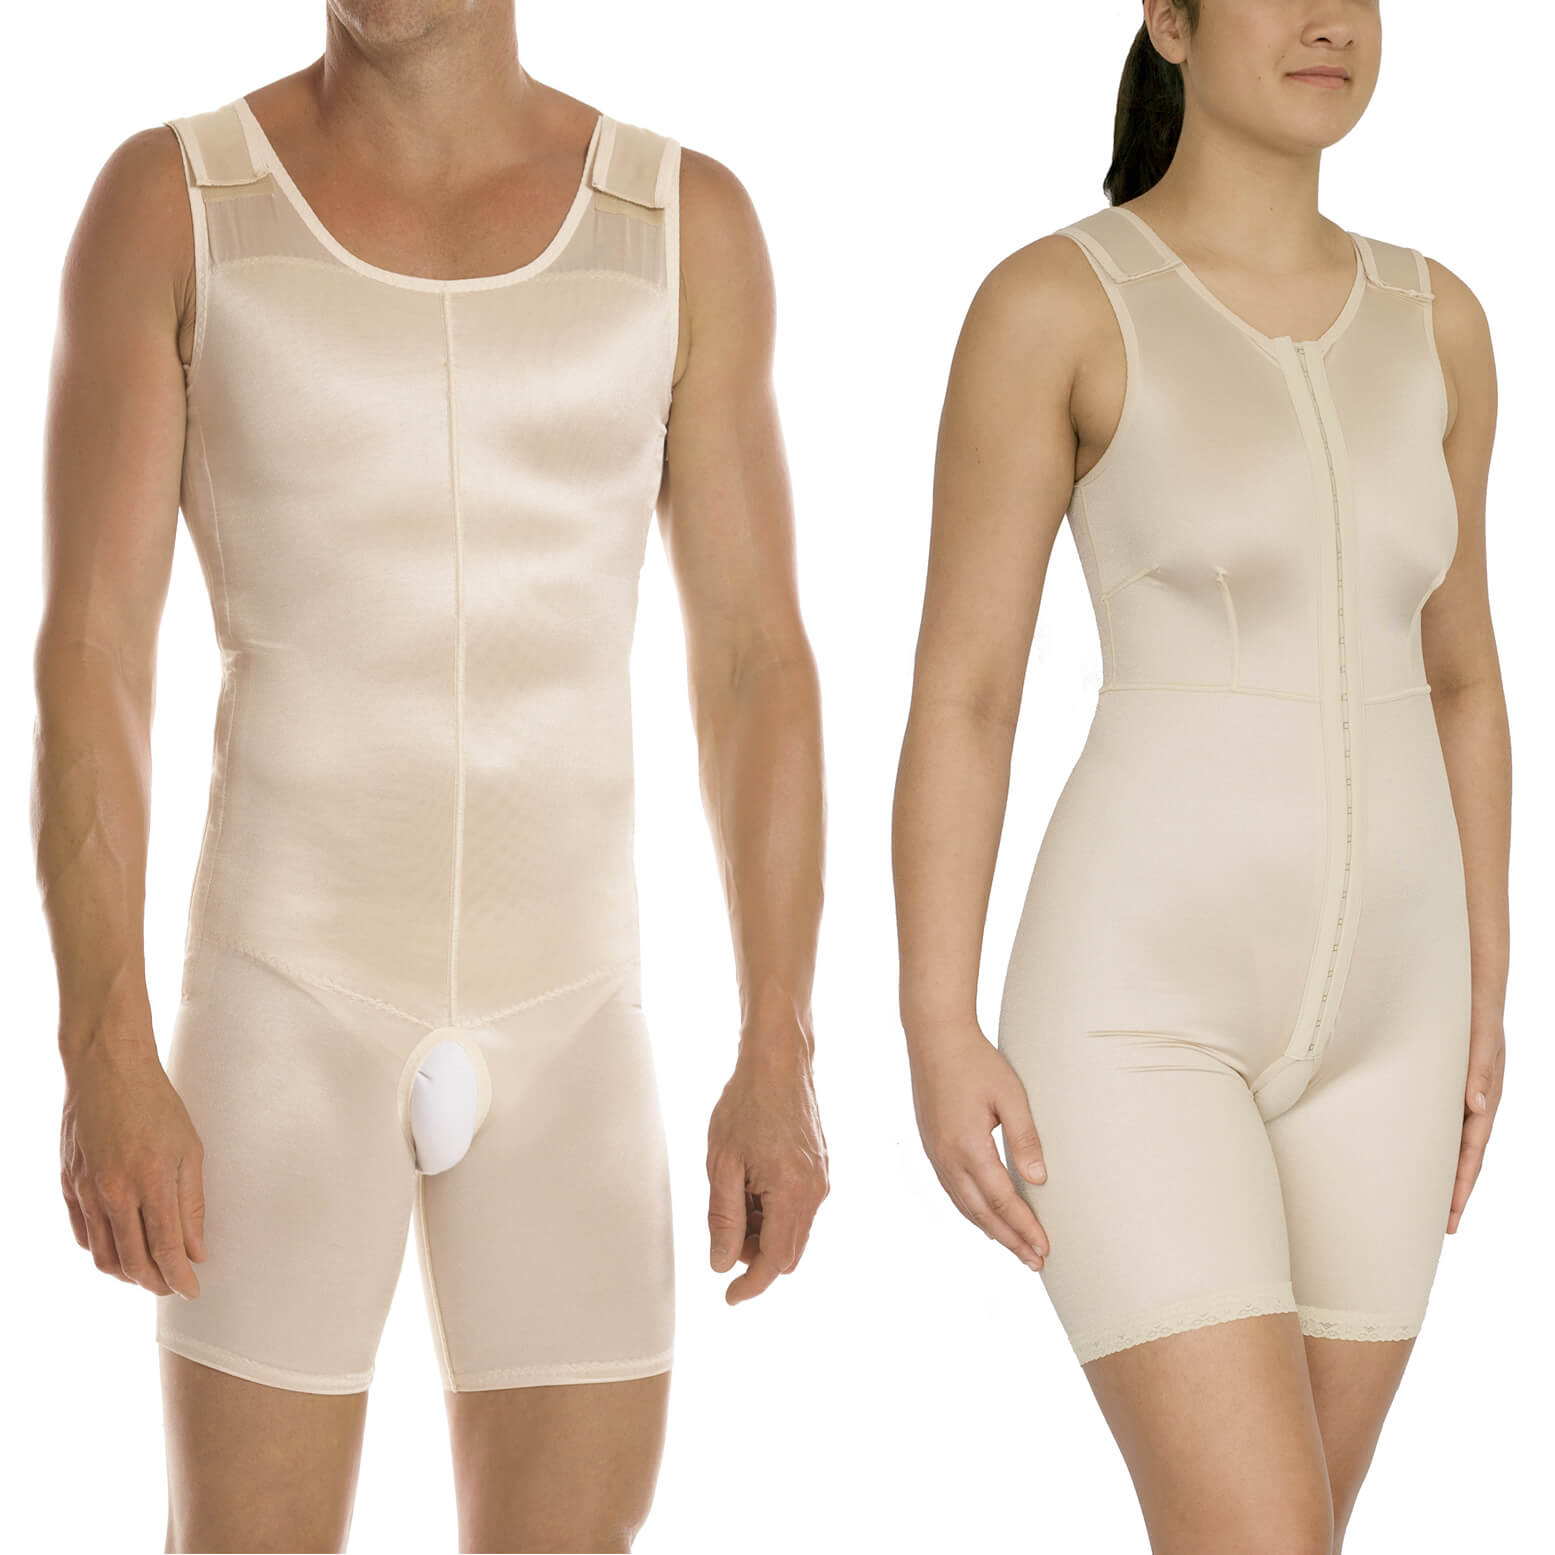 How to put on your Sculptures Compression Wear Garments 